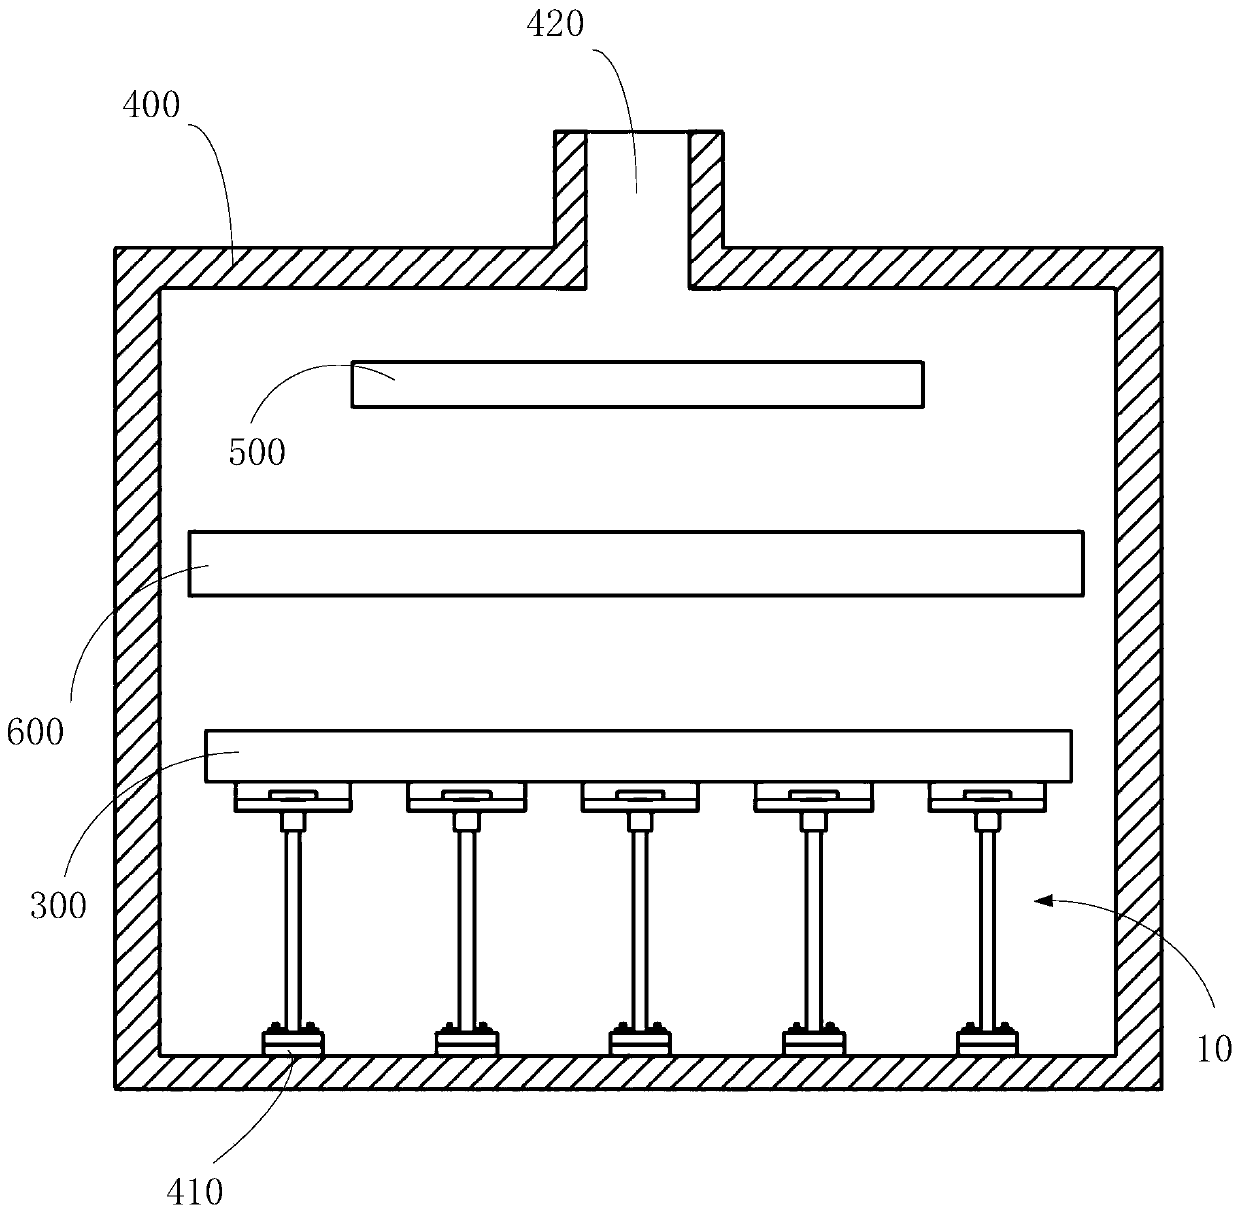 Grounding structure and chemical vapor deposition equipment with grounding structure